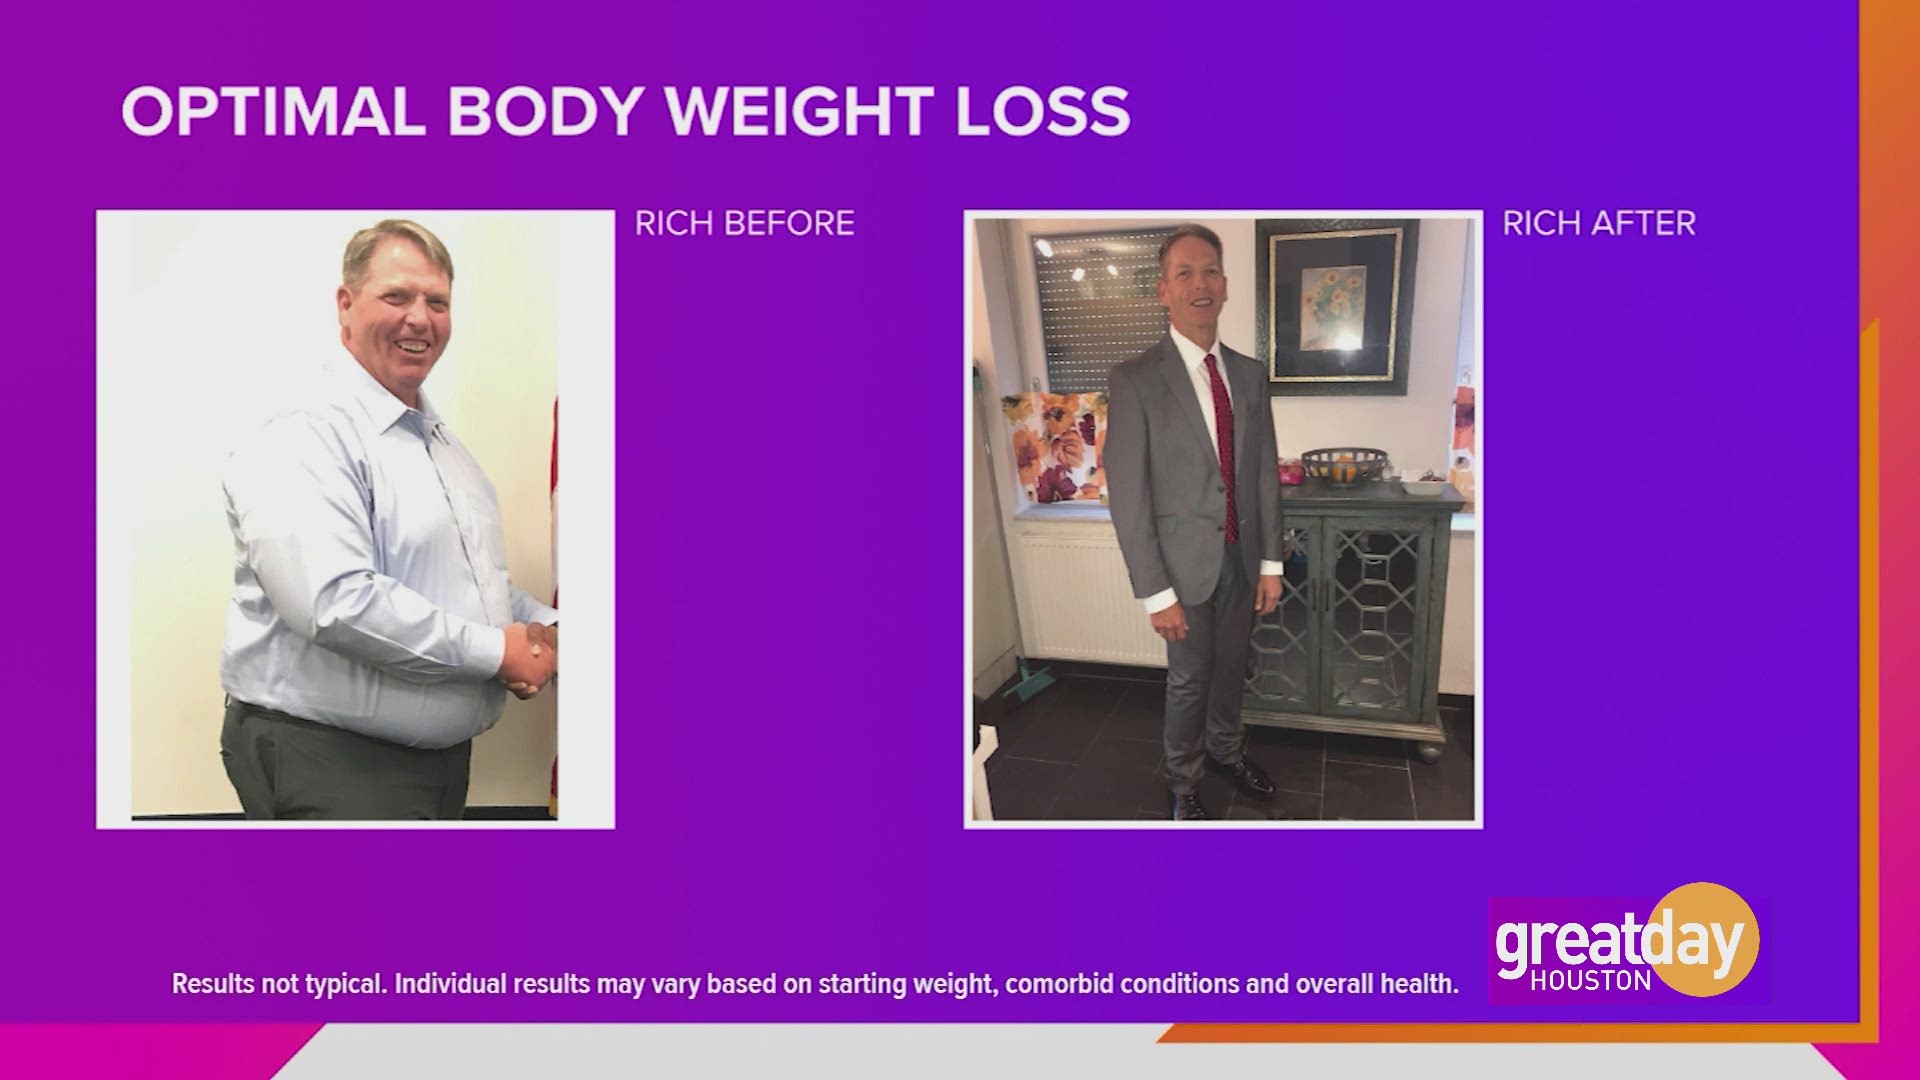 Dr. Cory Aplin helps clients achieve their Optimal Body by finding the root cause of their weight problem